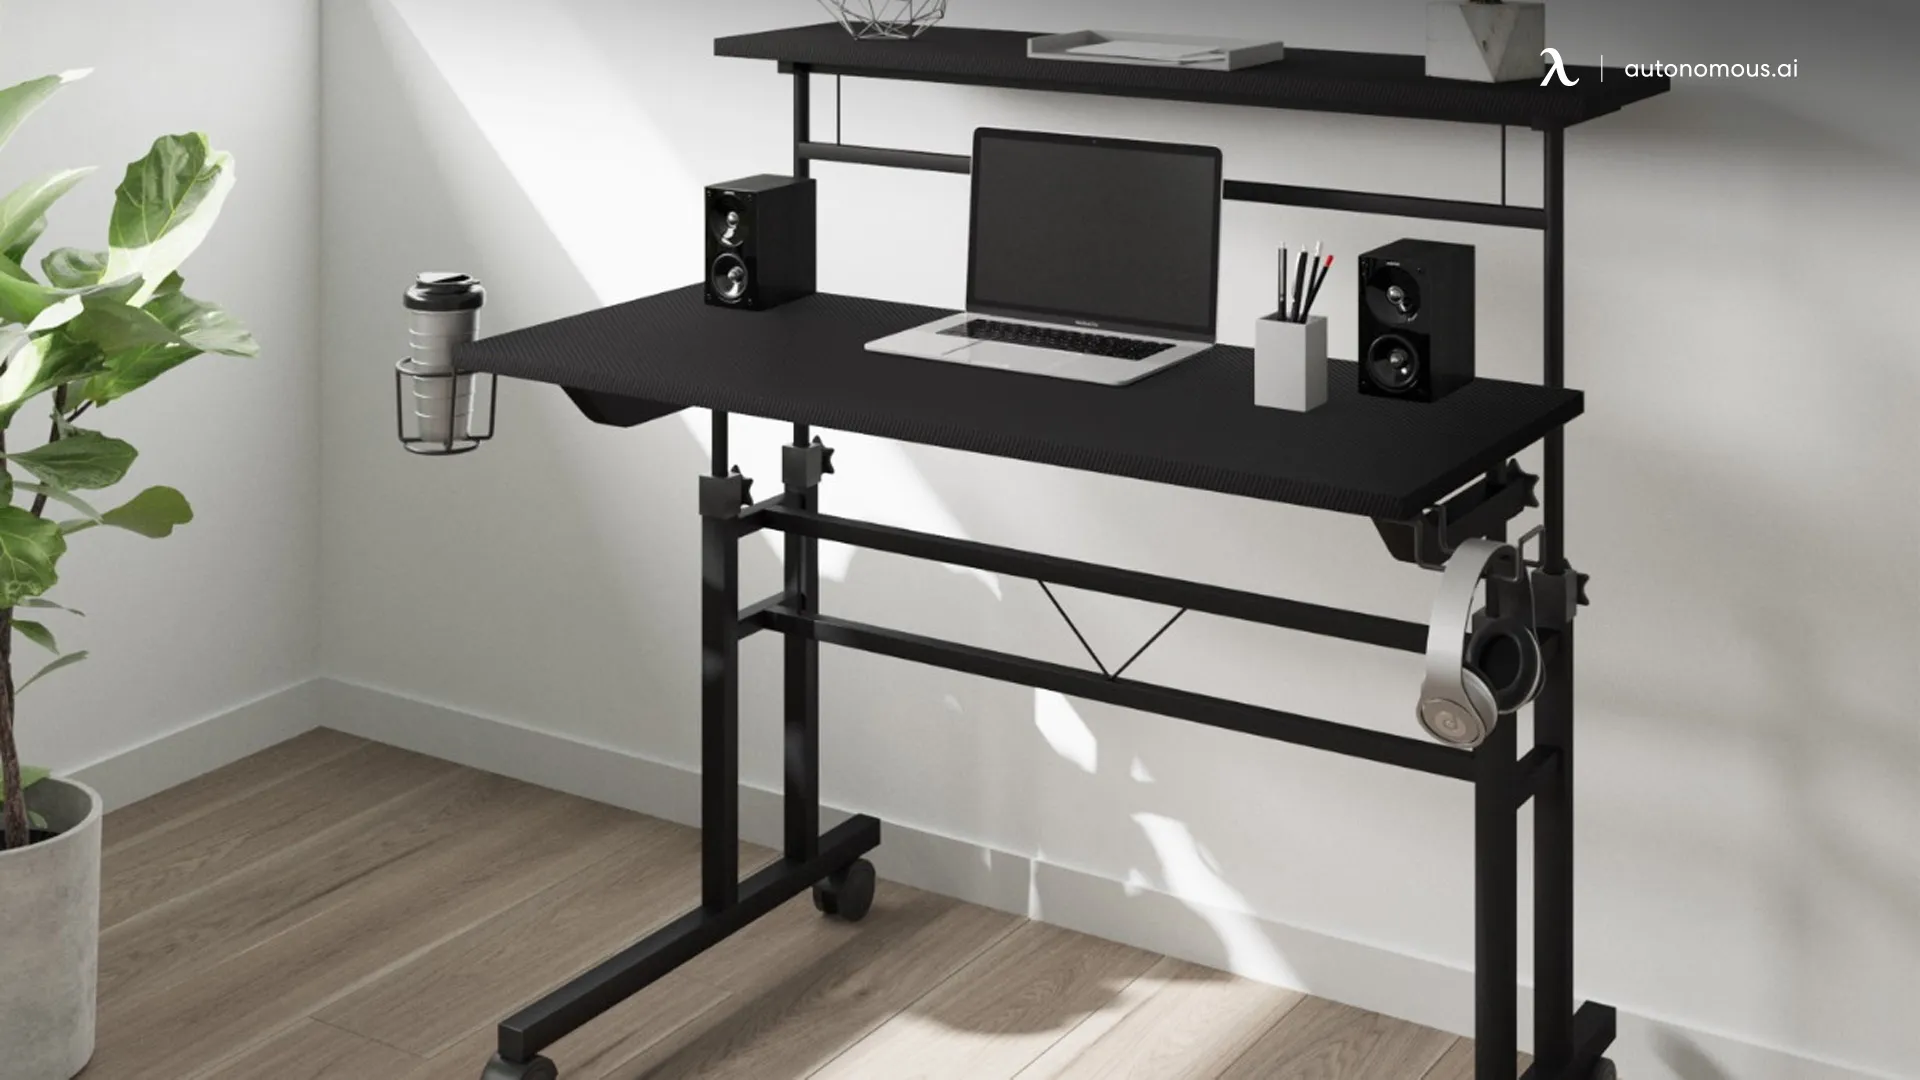 Find The Best Small Office Computer Desks on Wheels